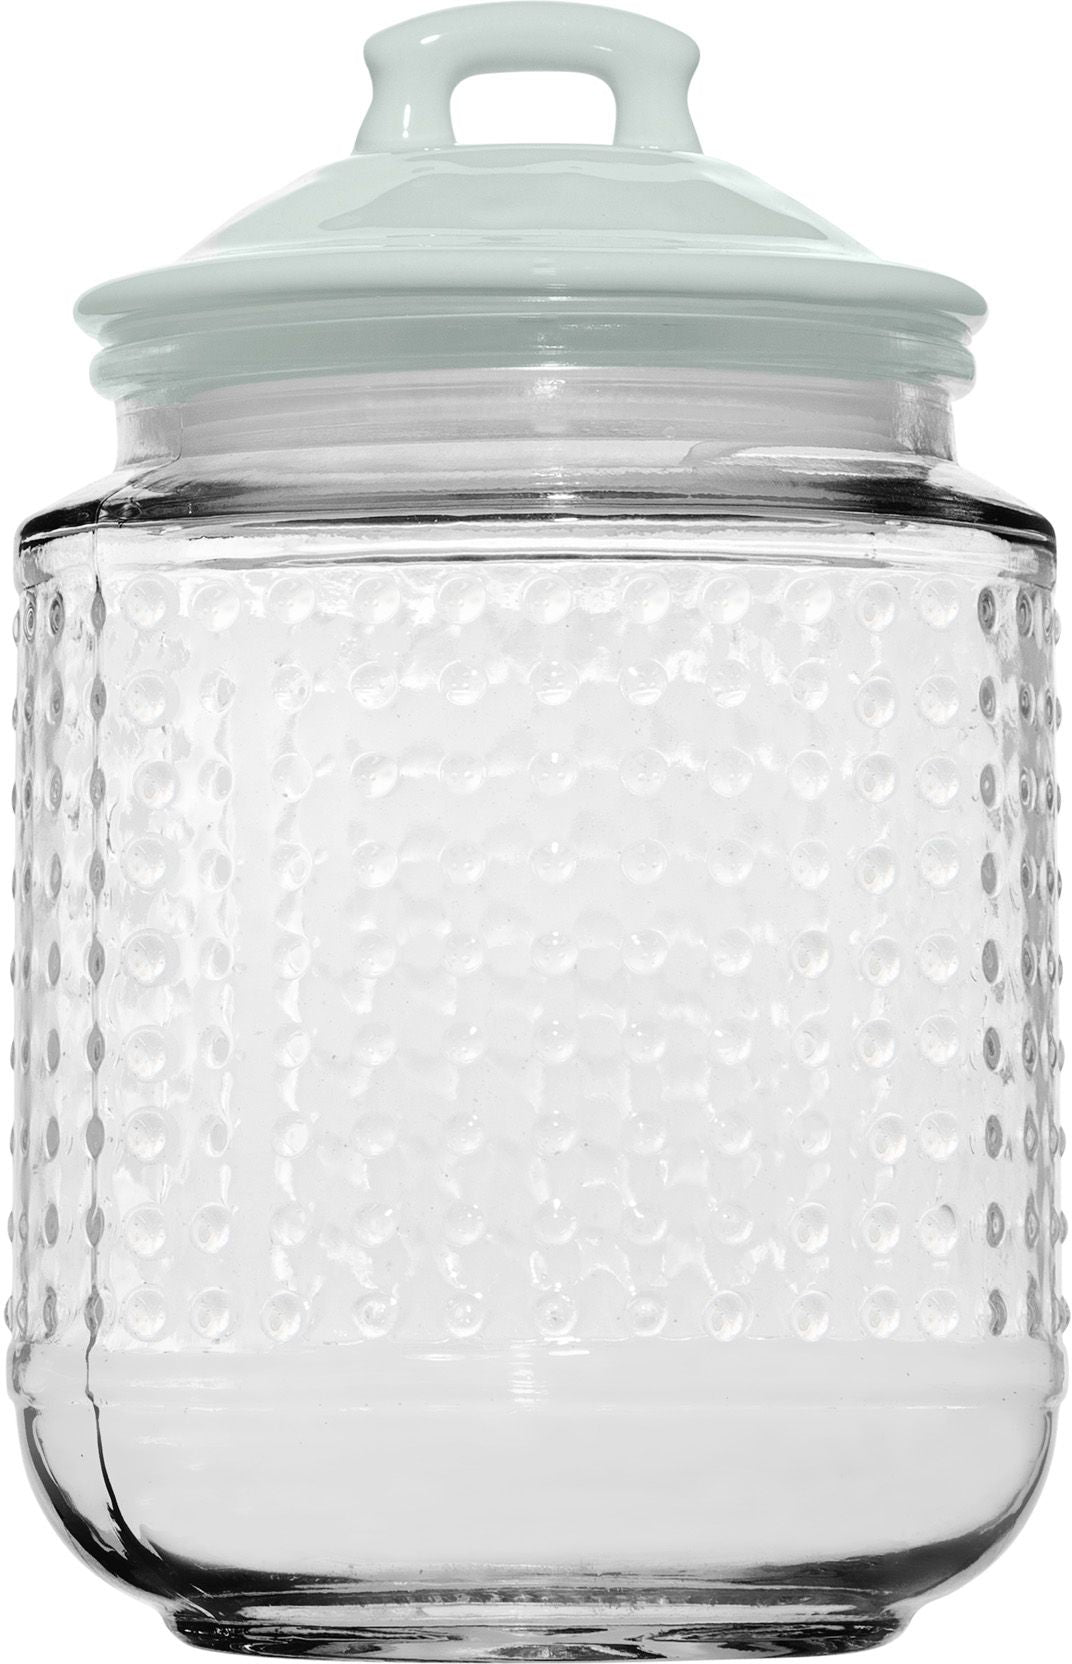 Magnolia Bakery Glass Hobnail Canister (S - Mint)